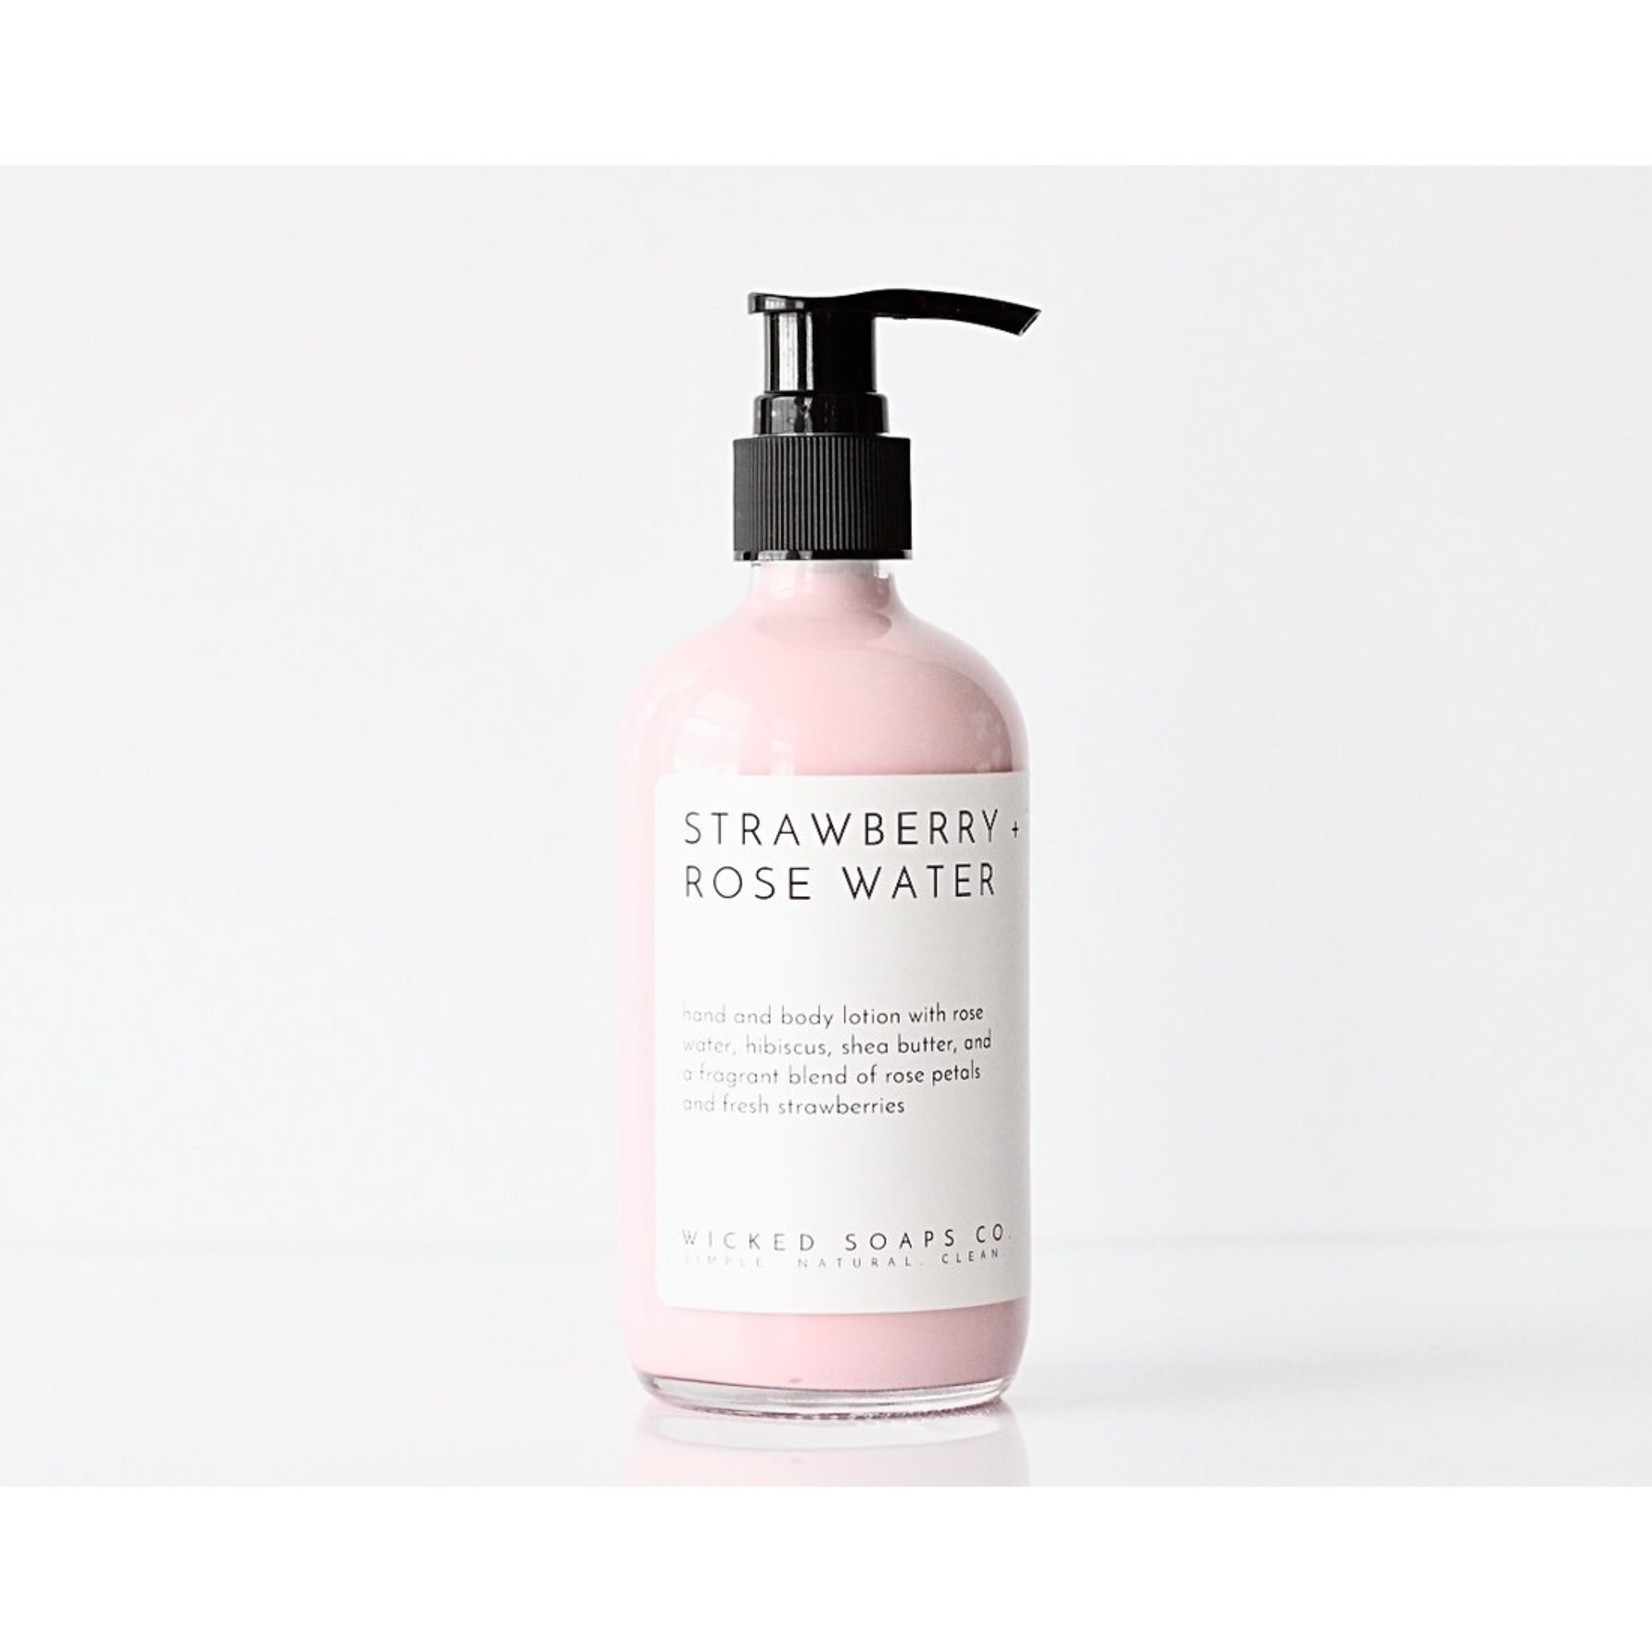 Wicked Soaps Co. Strawberry + Rose Water Lotion